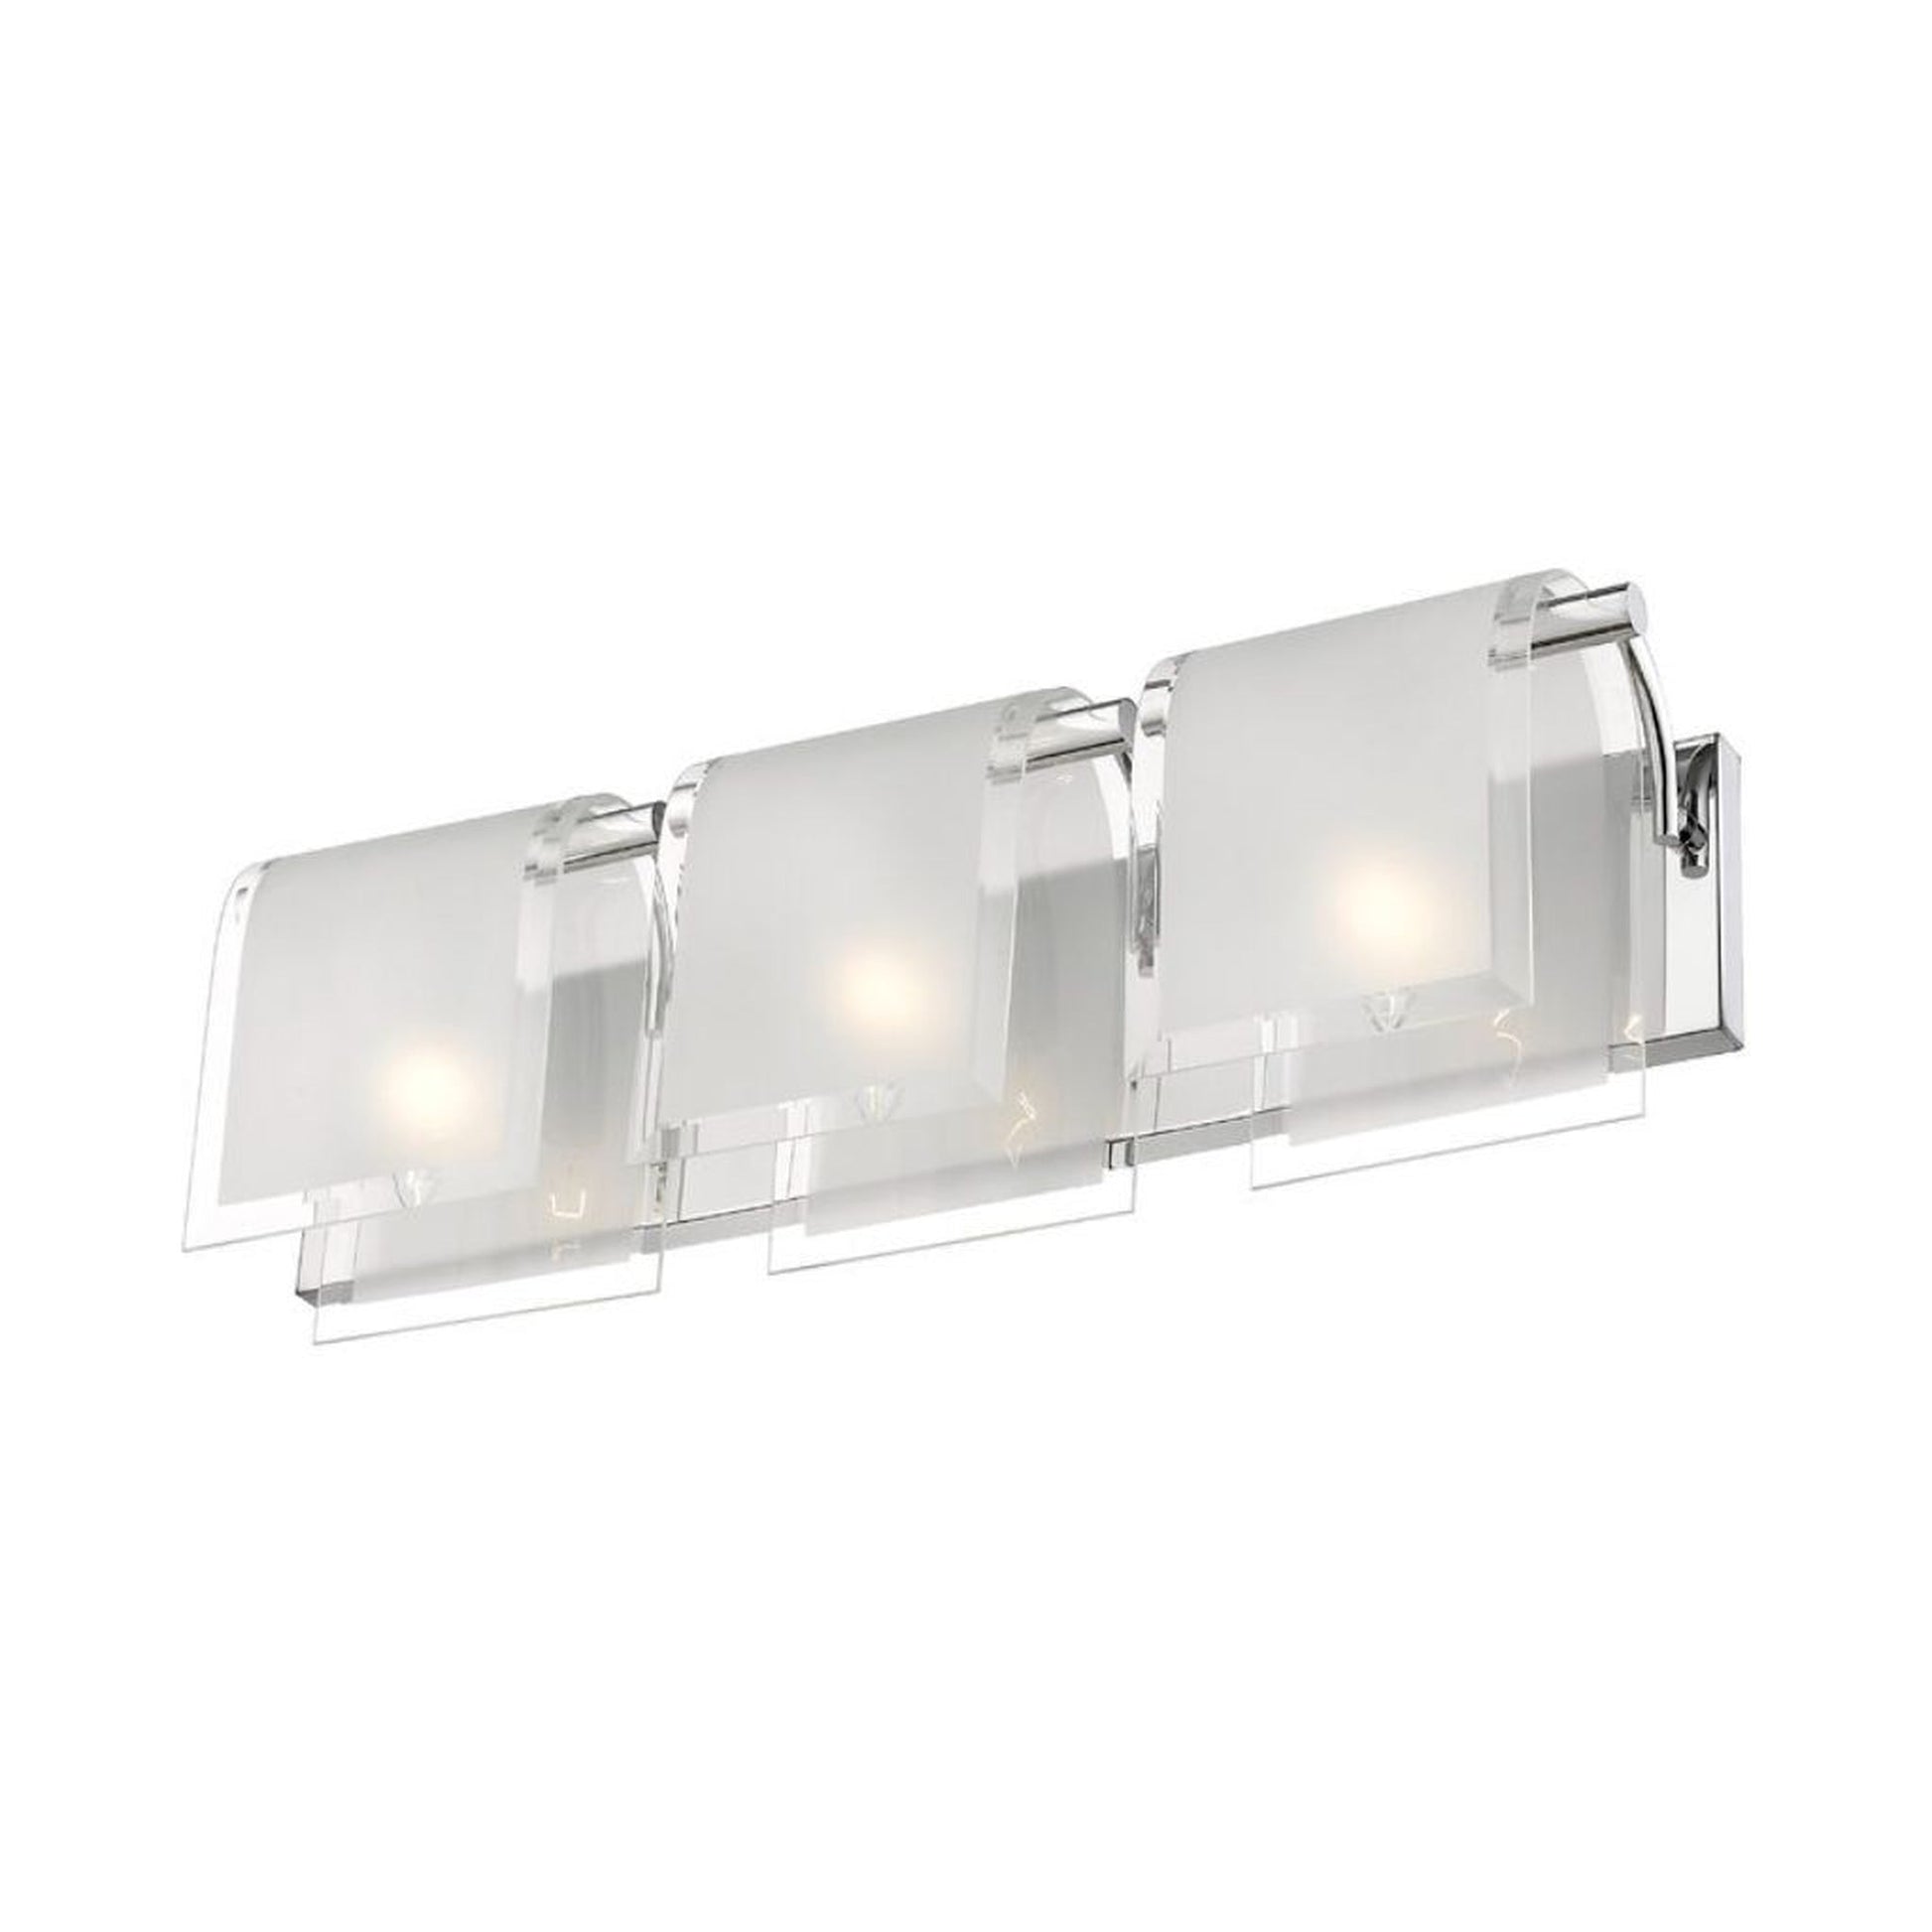 Z-Lite Zephyr 23" 3-Light Chrome Vanity Light With Clear Beveled and Frosted Glass Shade